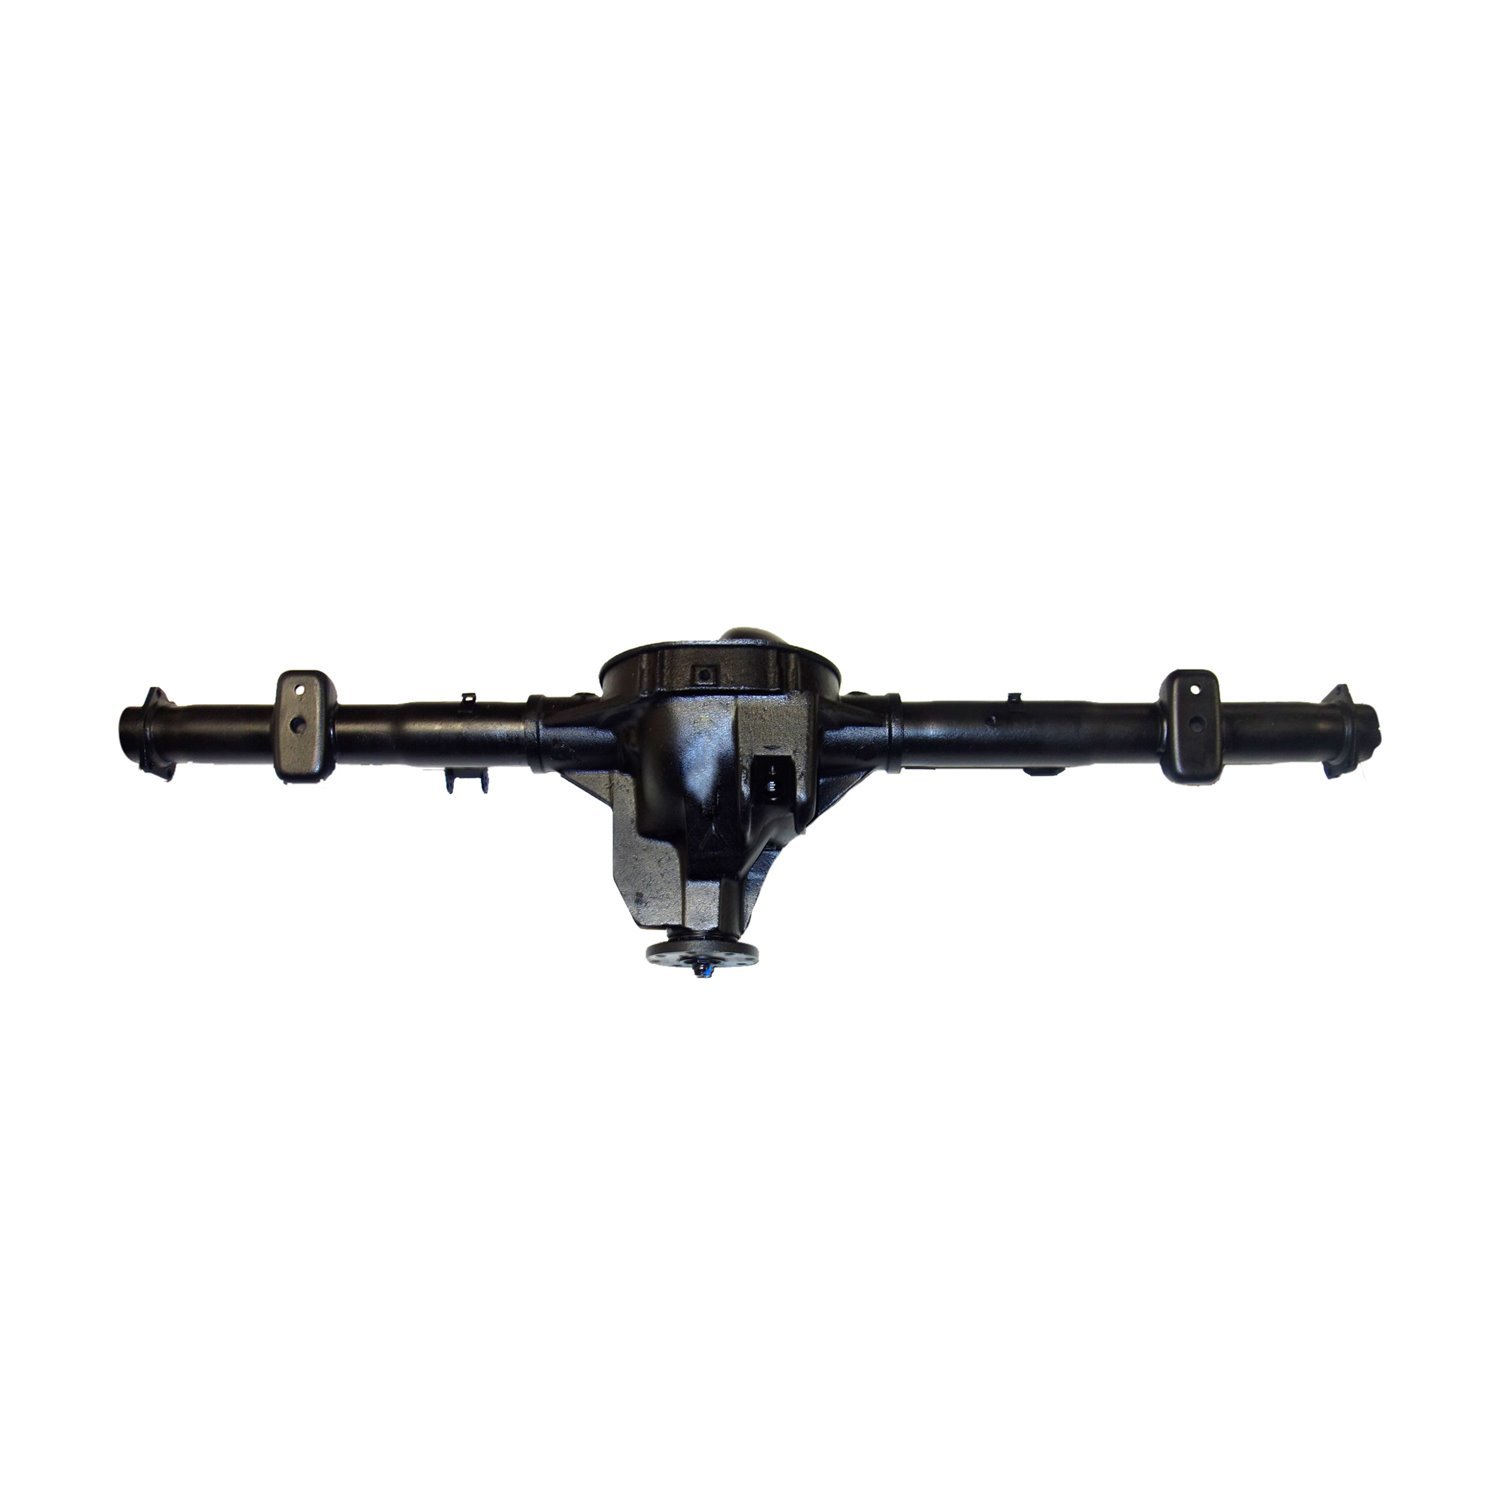 Remanufactured Complete Axle Assembly for 8.8" 99-05 Ranger 3.55 , 9" Drum Brakes